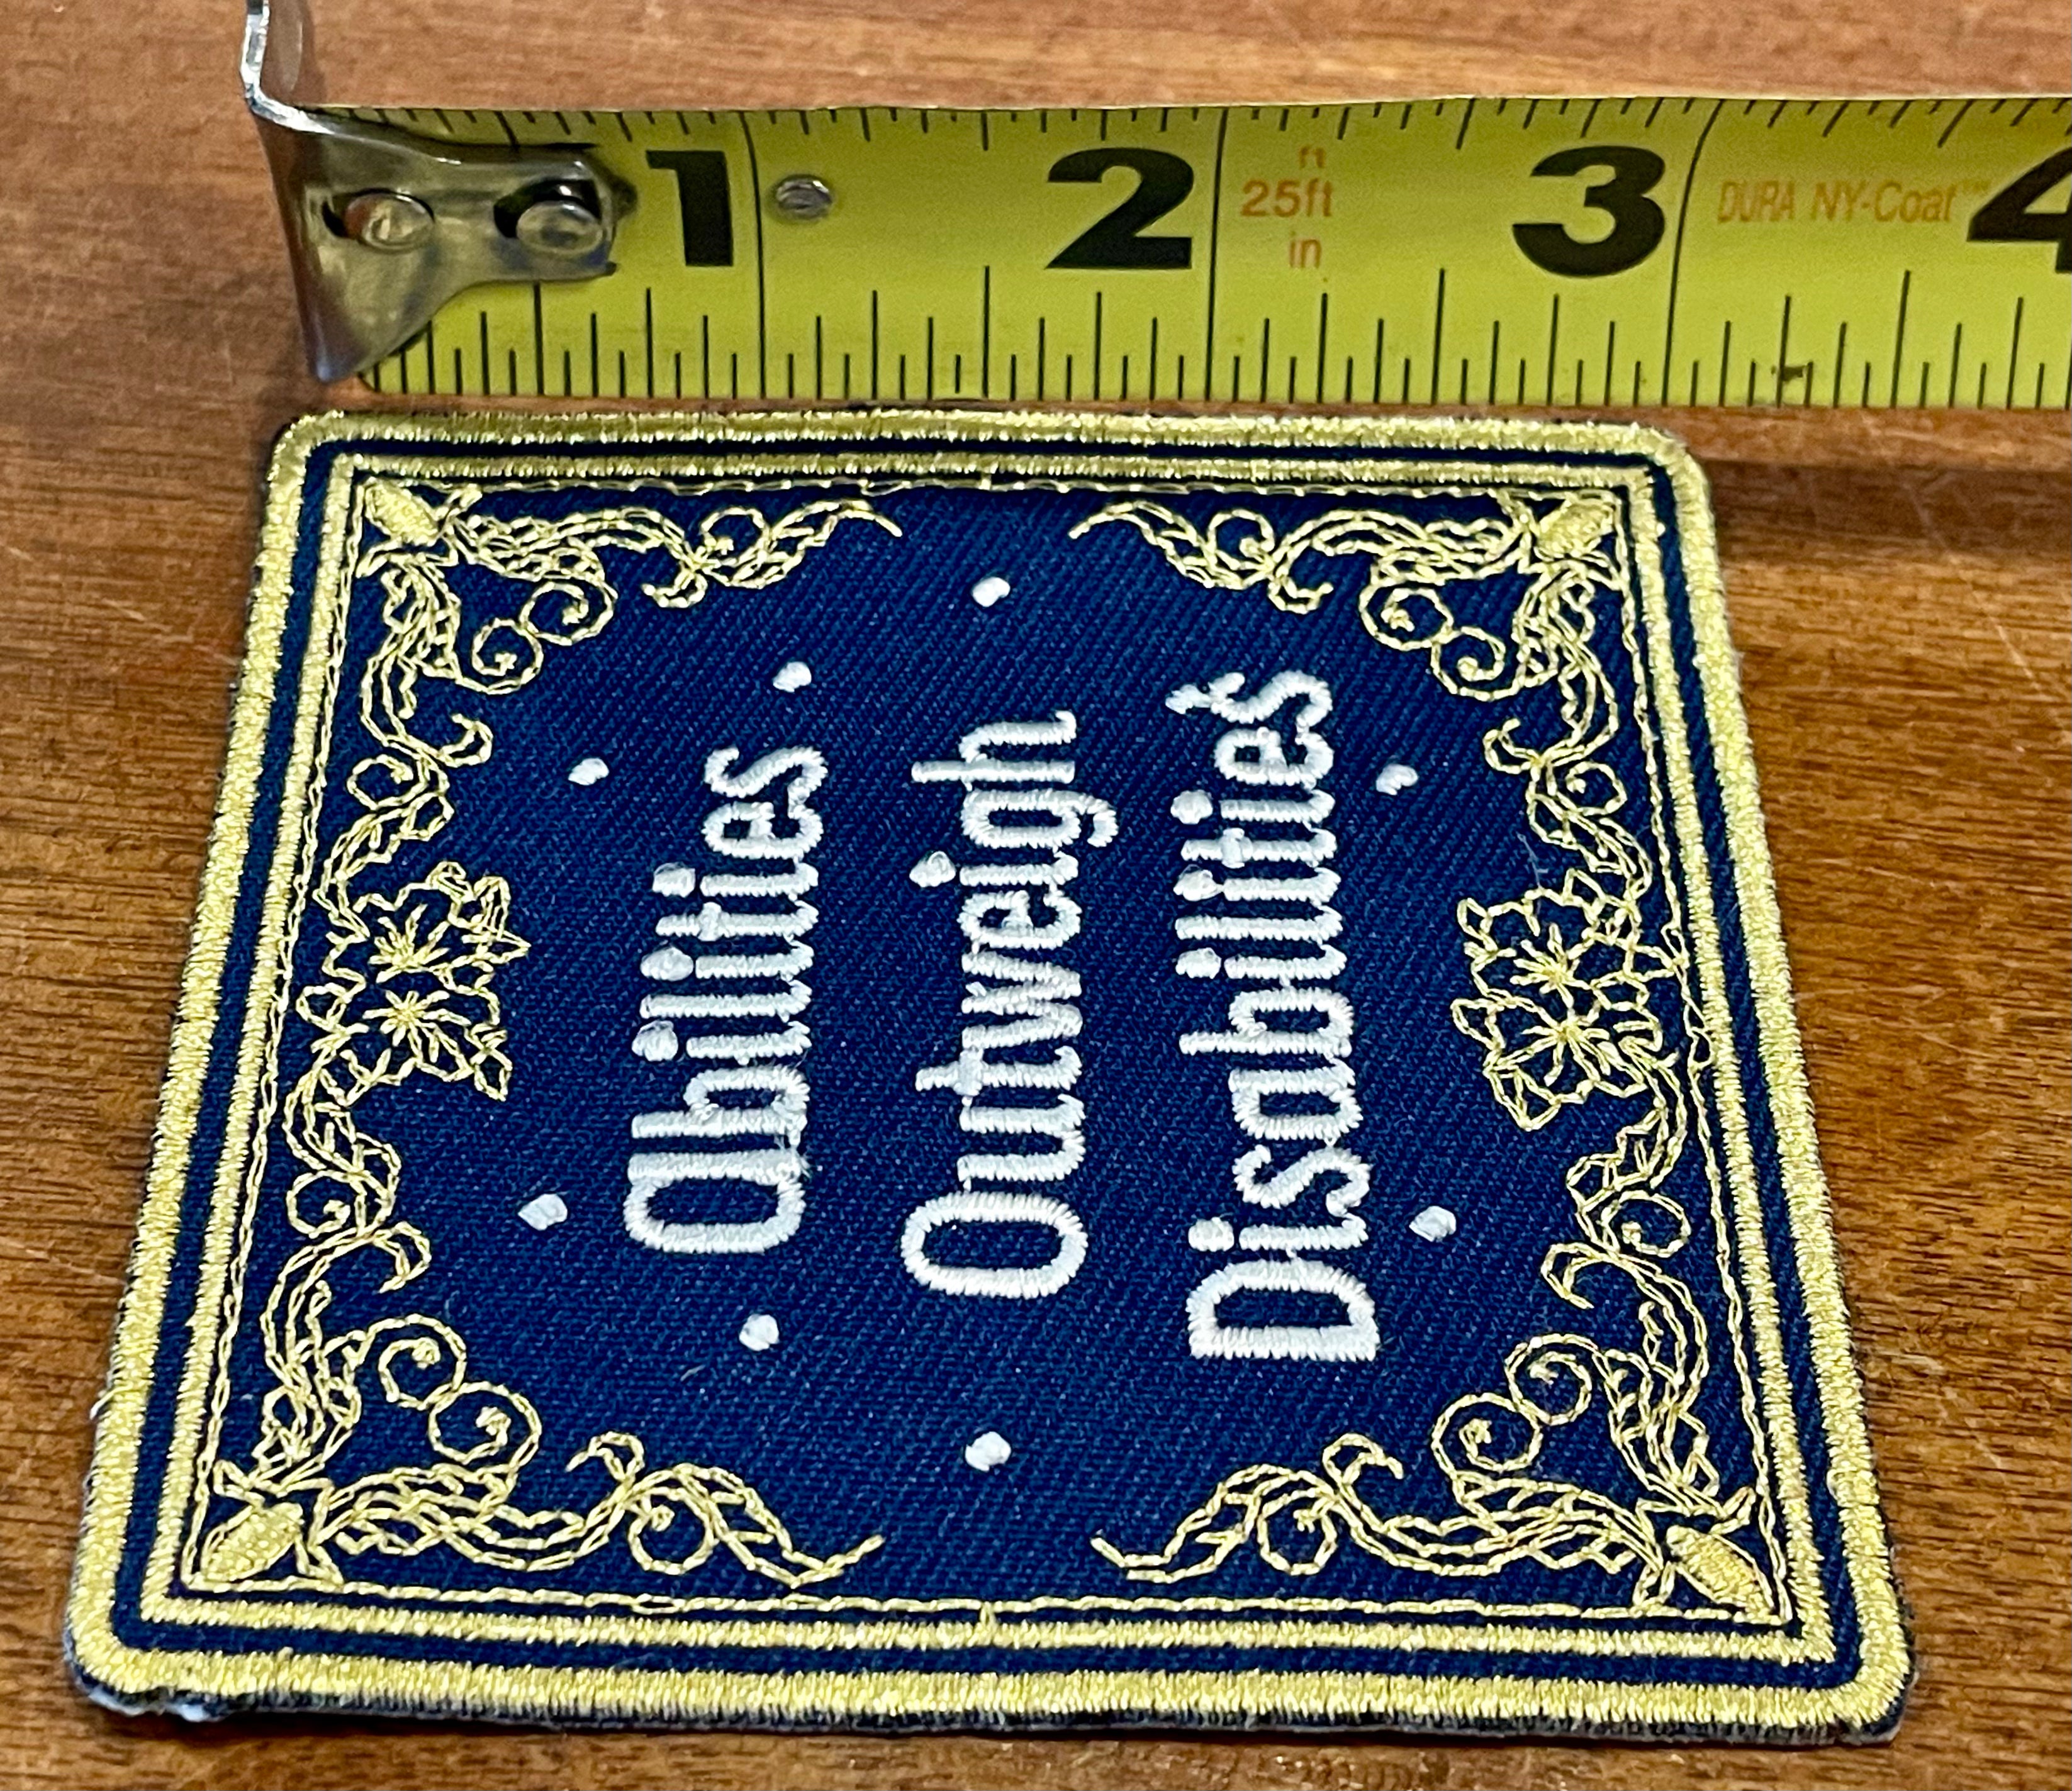 Abilities Outweigh Disabilities Patch